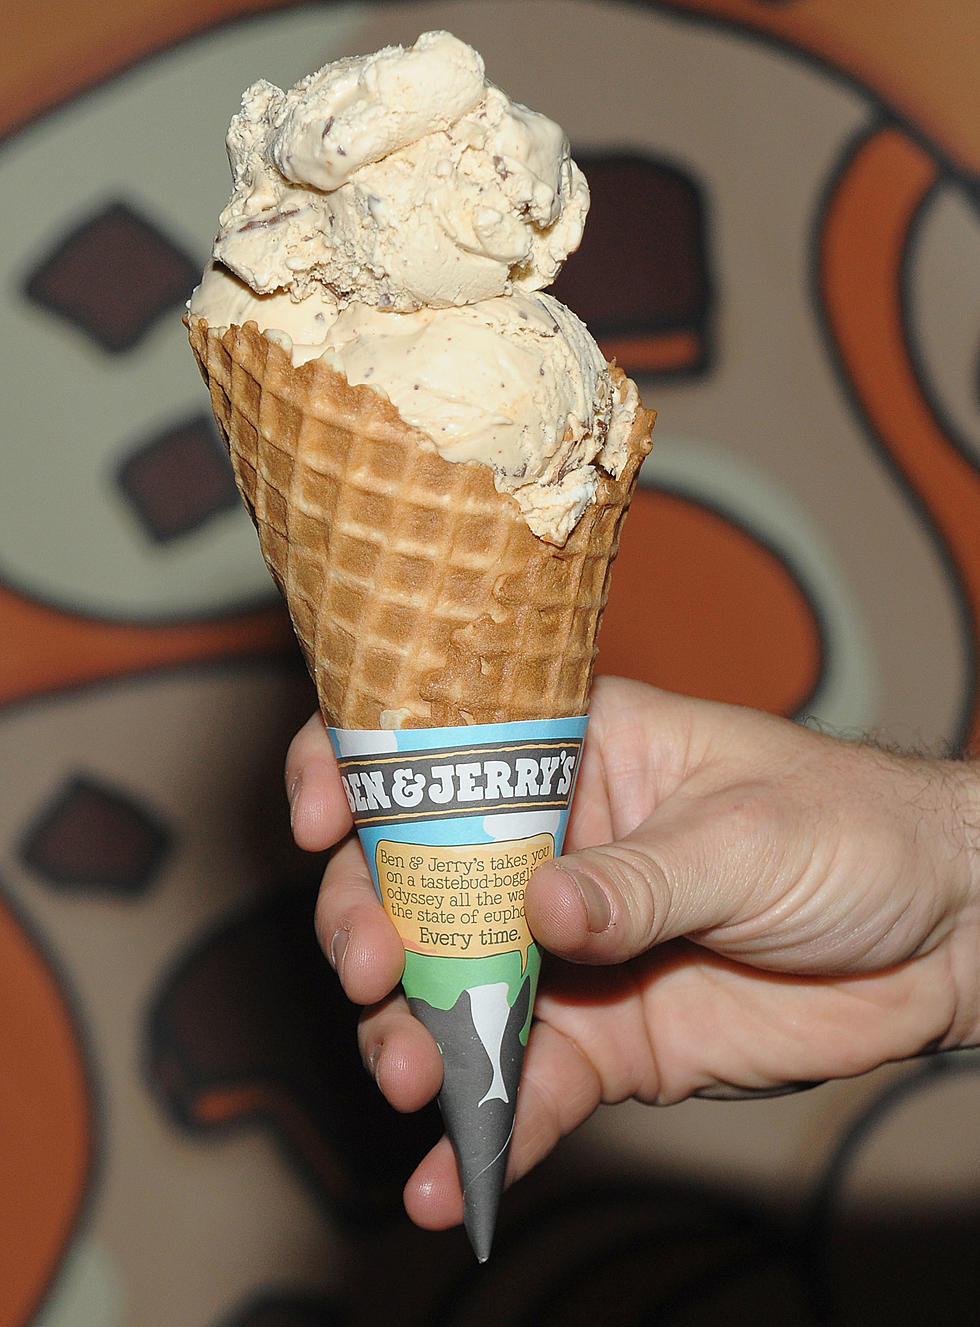 Free Cone Day at Ben & Jerry's!